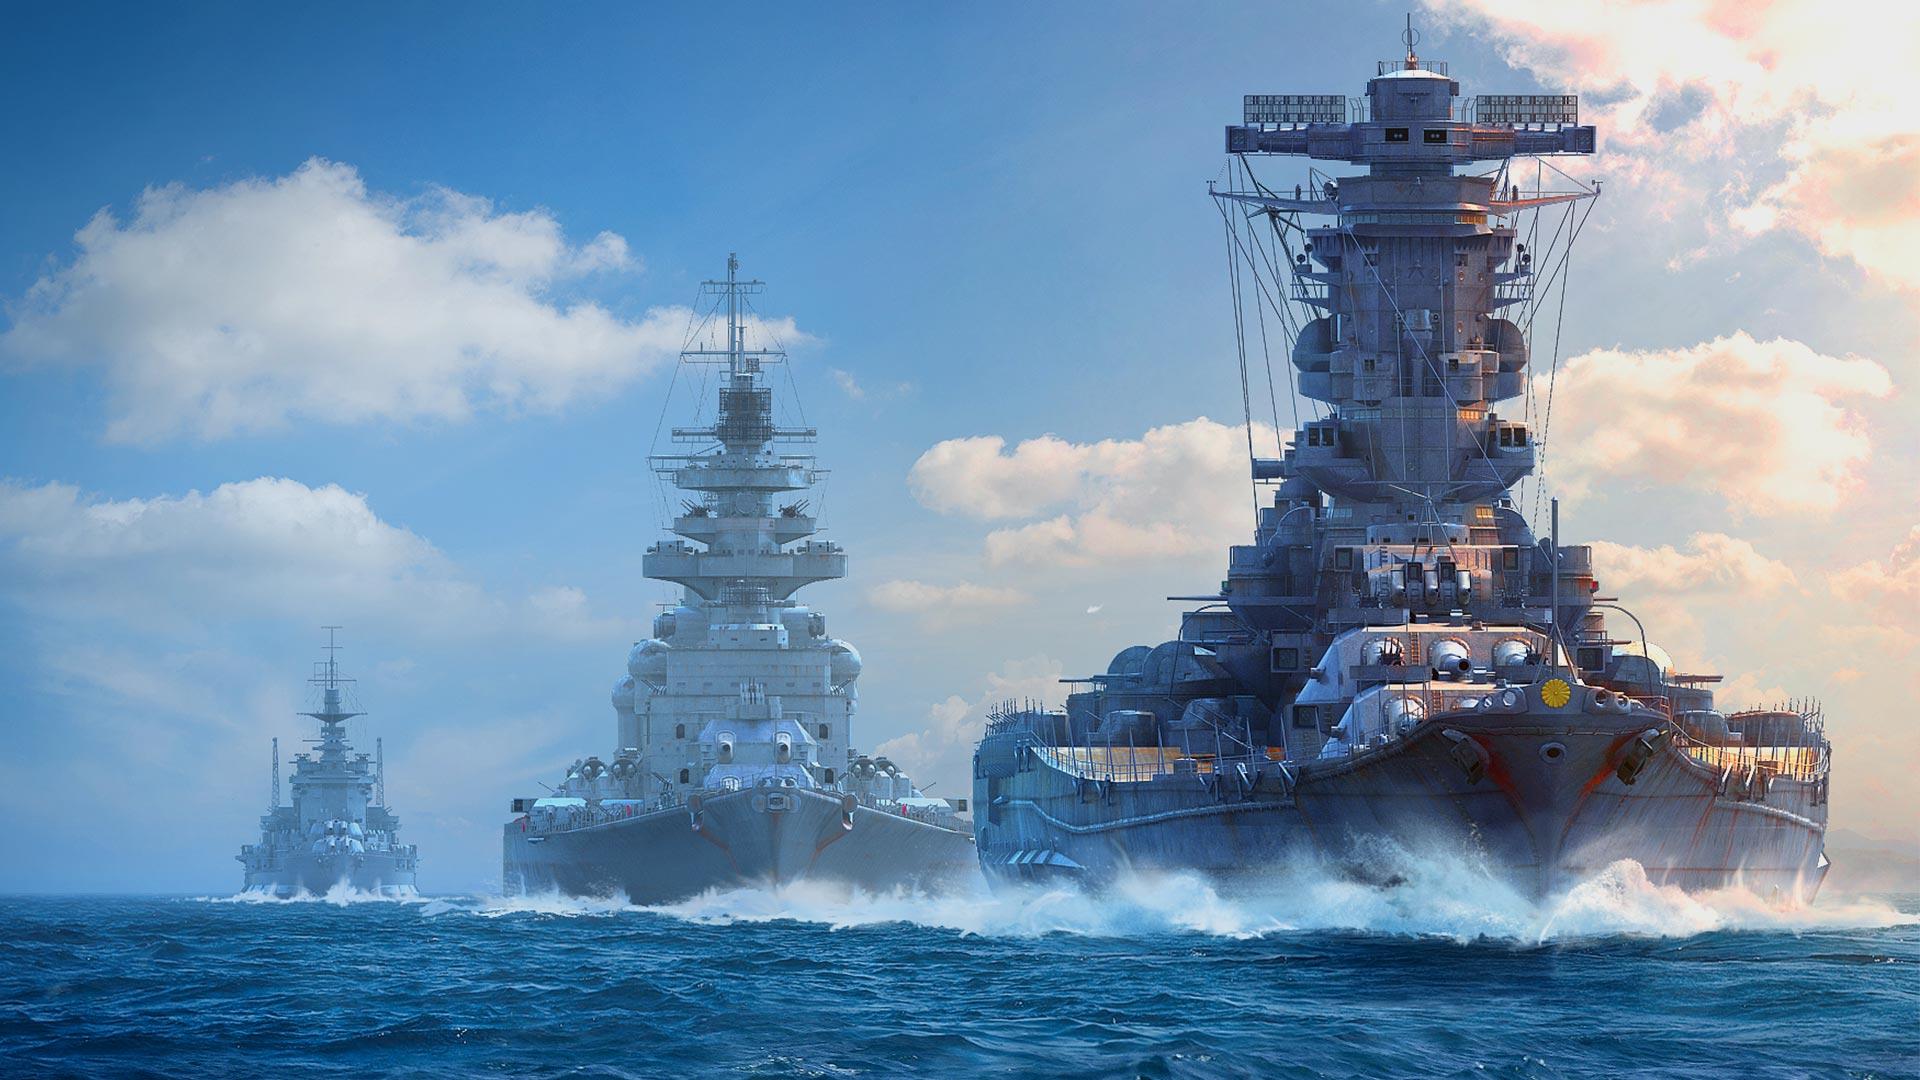 Pacific Warships downloading